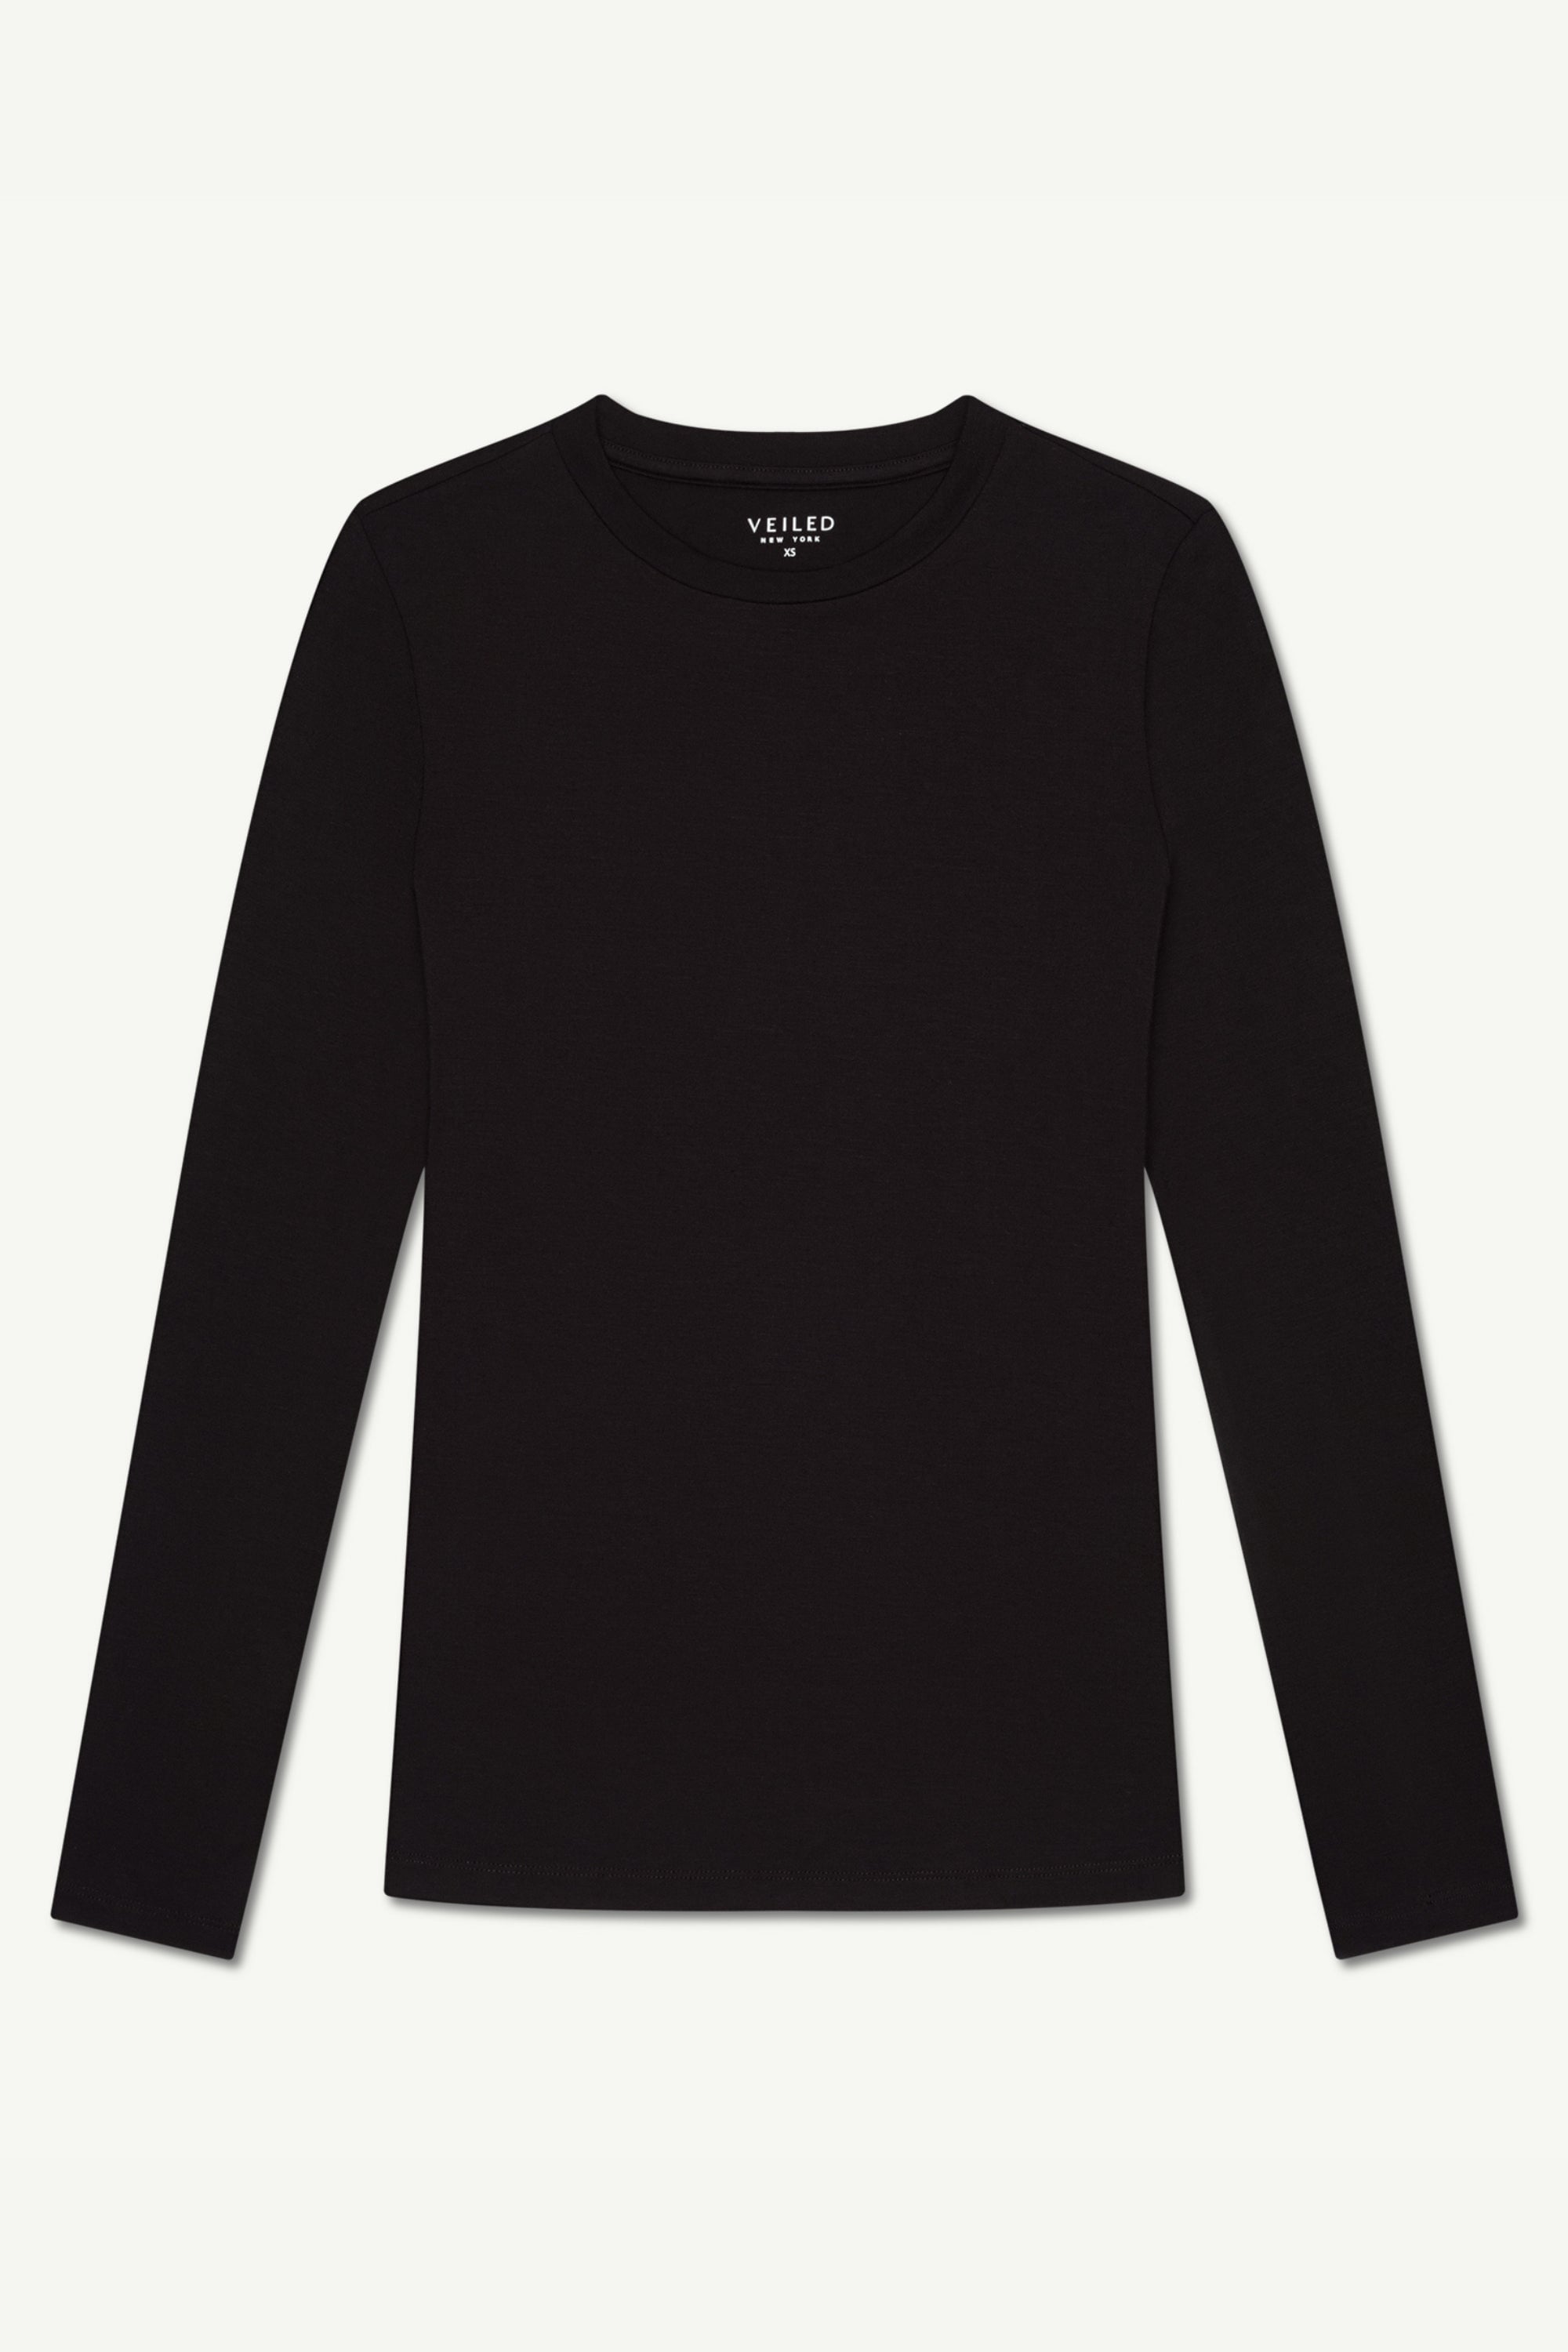 Essential Crew Neck Bamboo Jersey Top - Black Clothing Veiled 